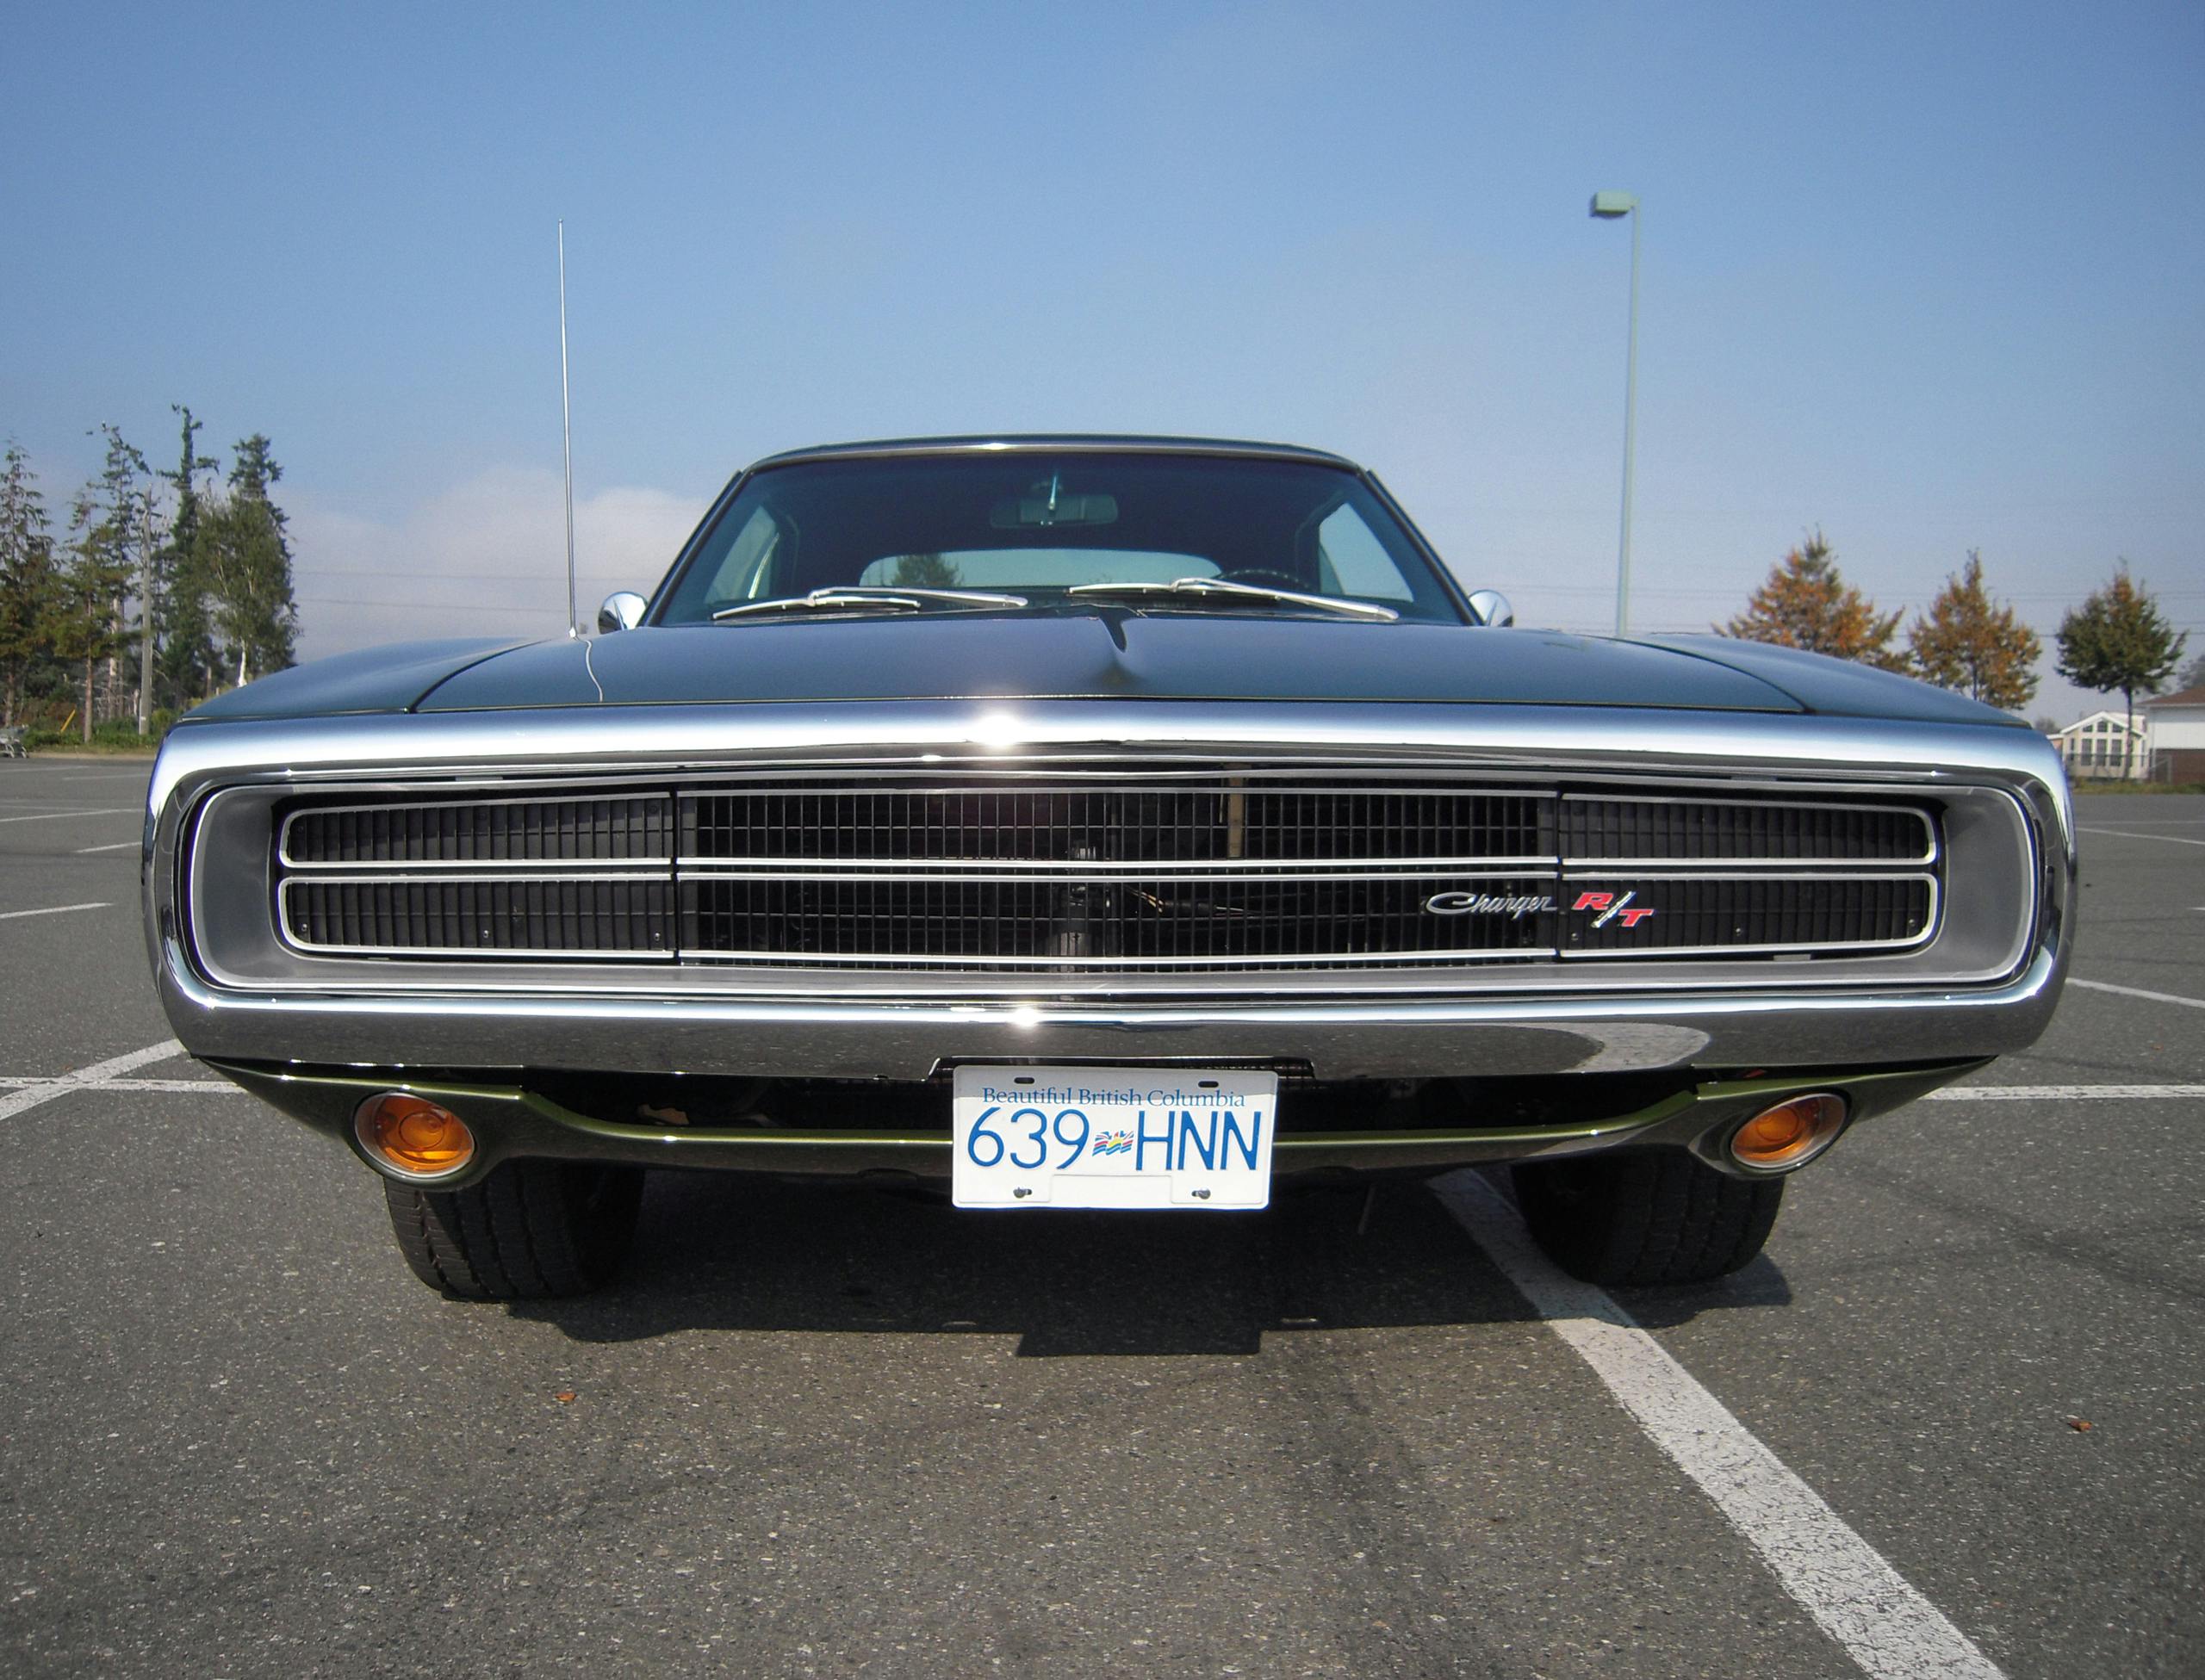 Through sickness and health, my '70 Charger R/T and I keep cruising -  Hagerty Media